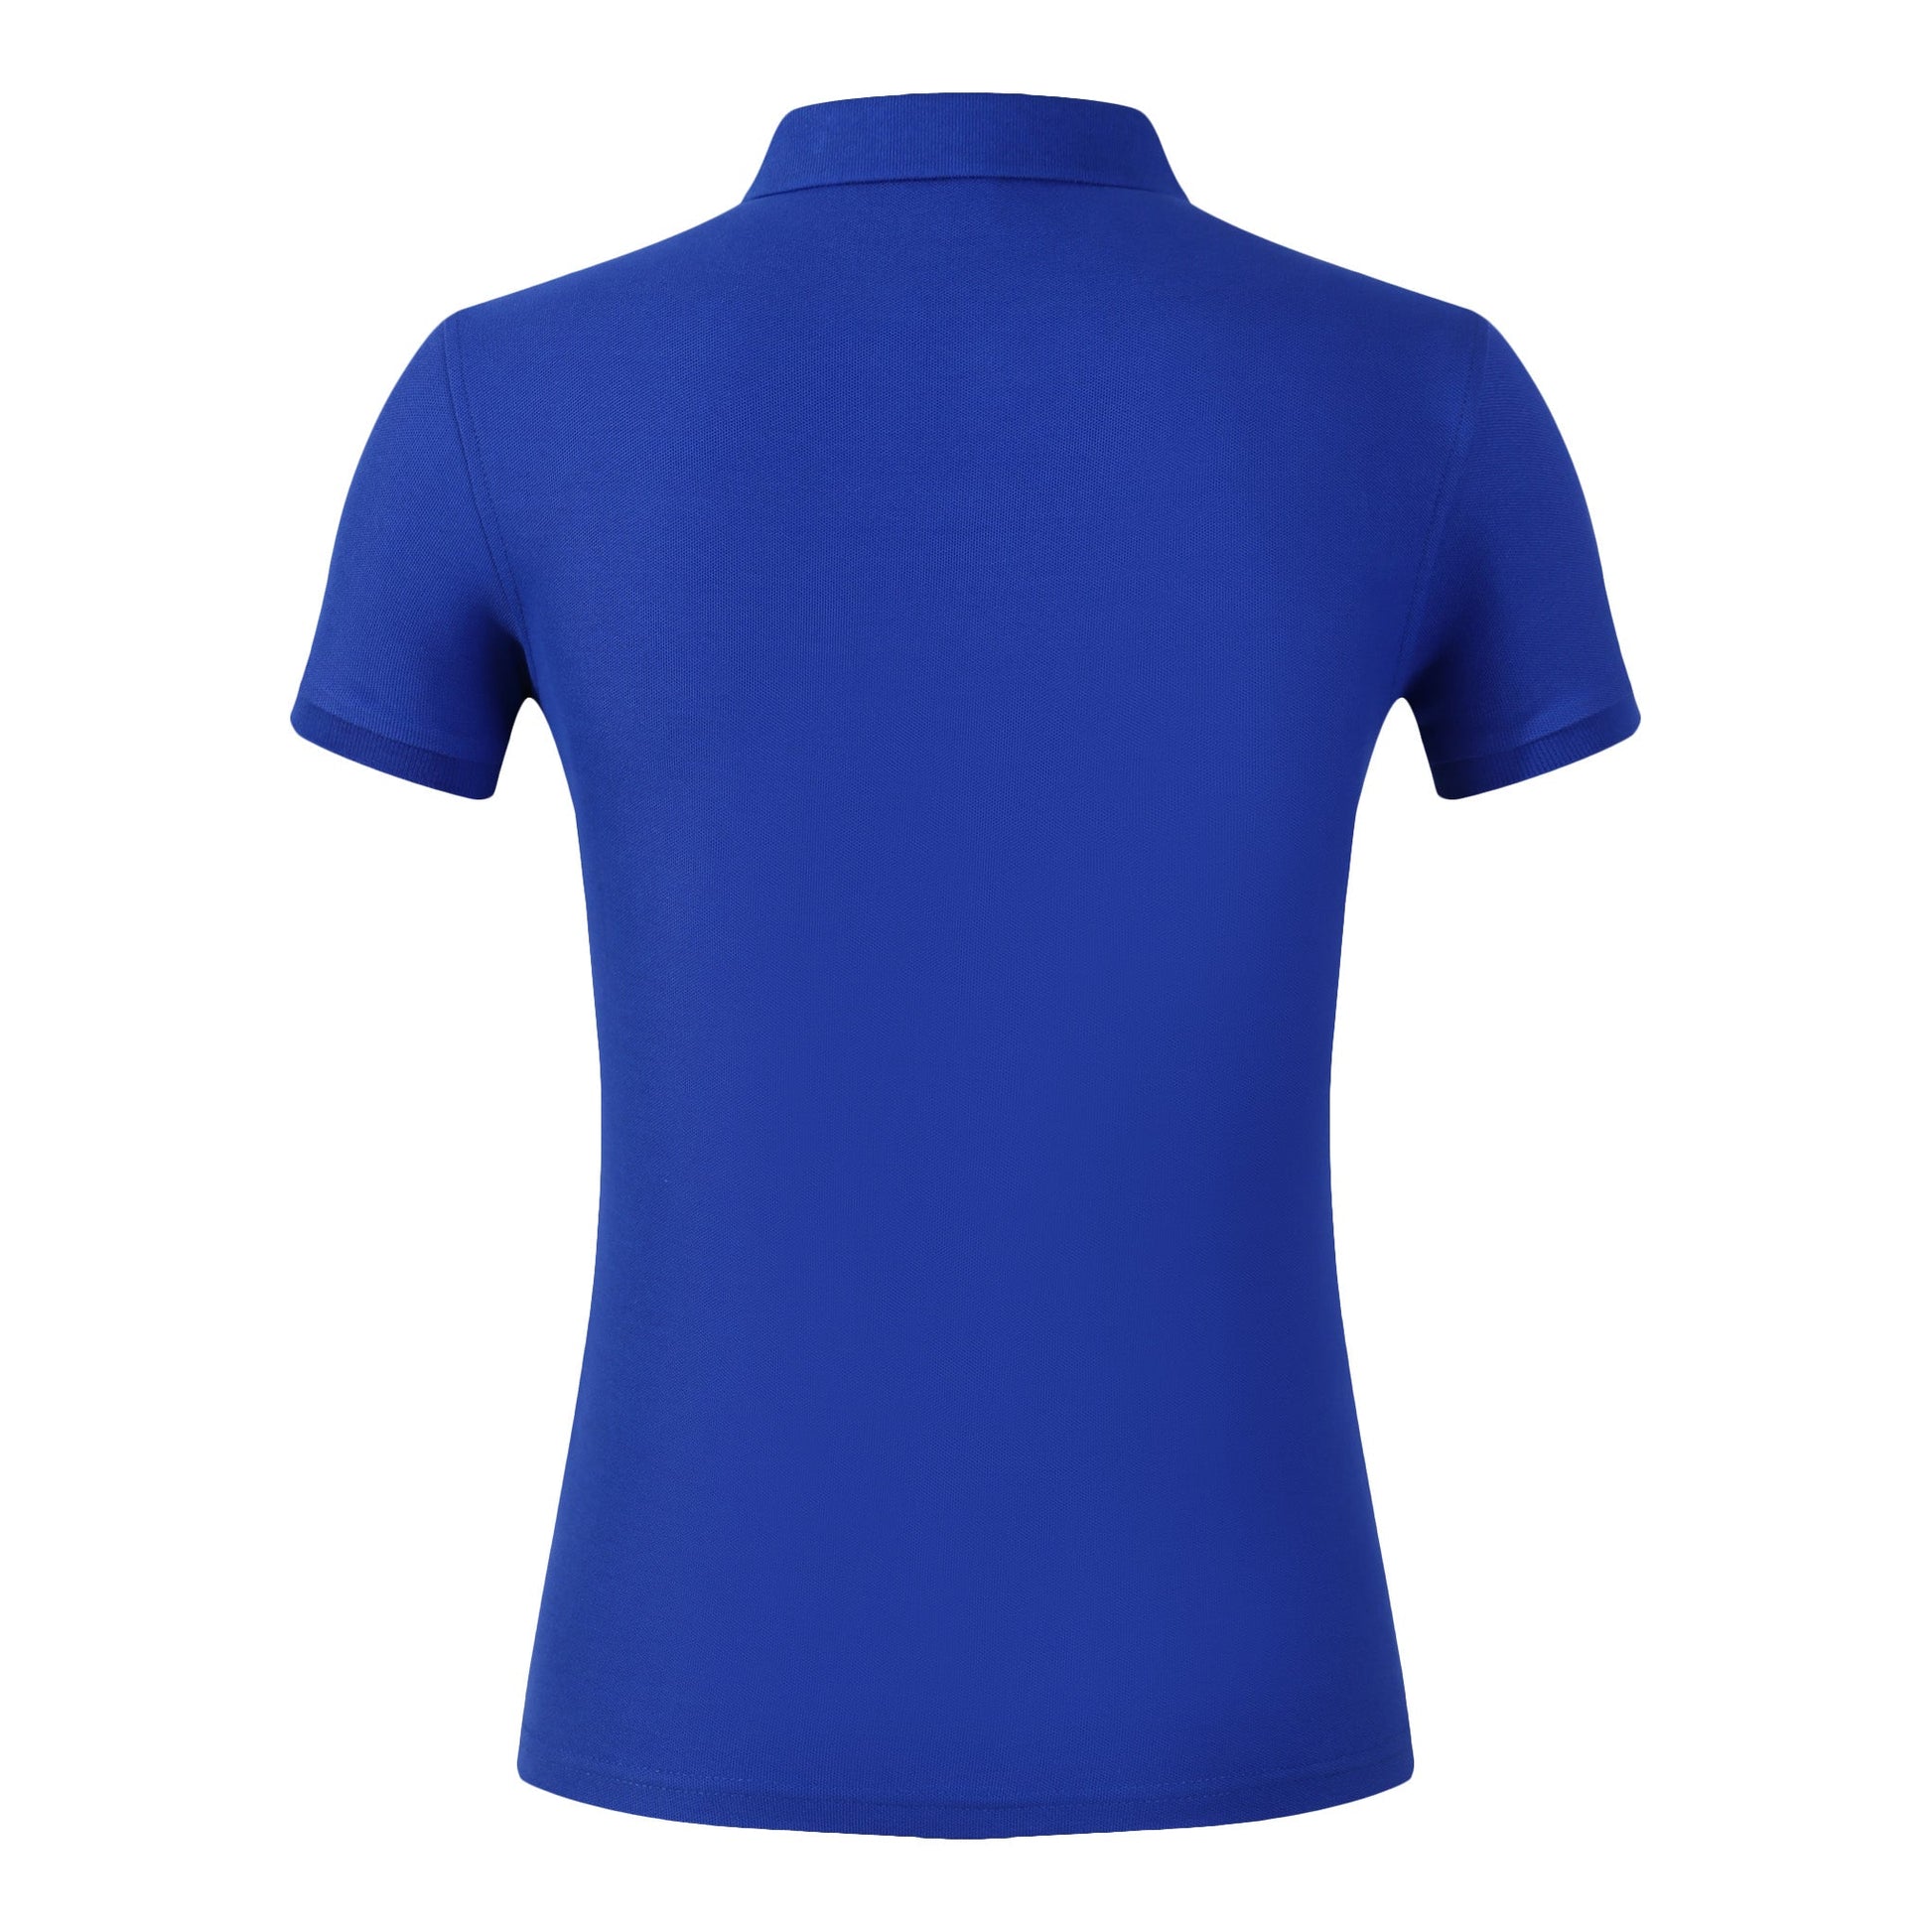 OEM Import from China Clothing Ladies Mesh Polo Women Short Sleeve Jersey Sport Polo Shirt